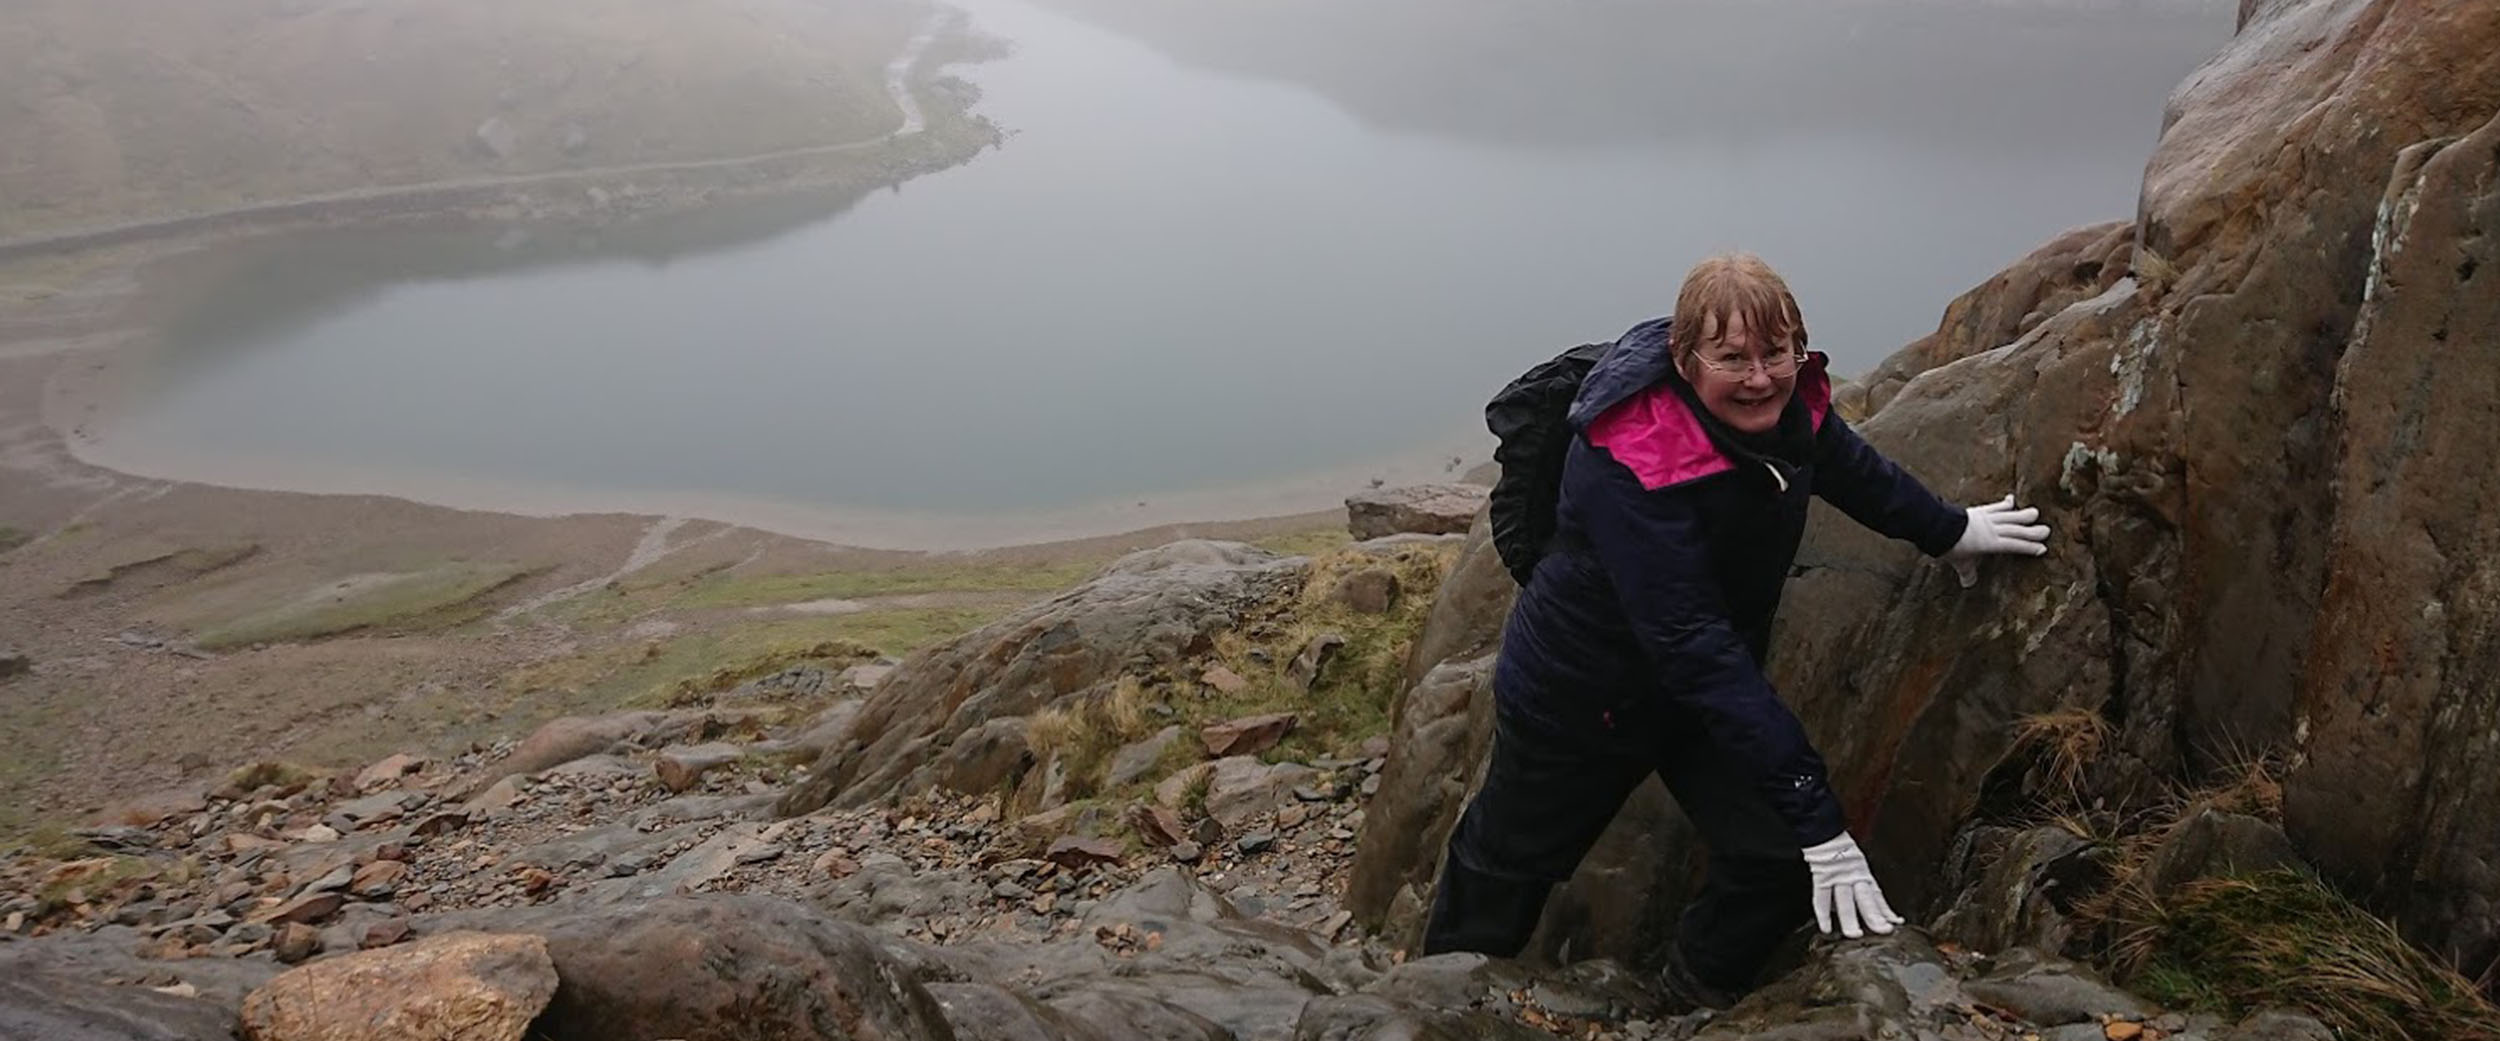 A lady making her way up Snowdon for the first time. Despite what looks like a damp day she is smiling